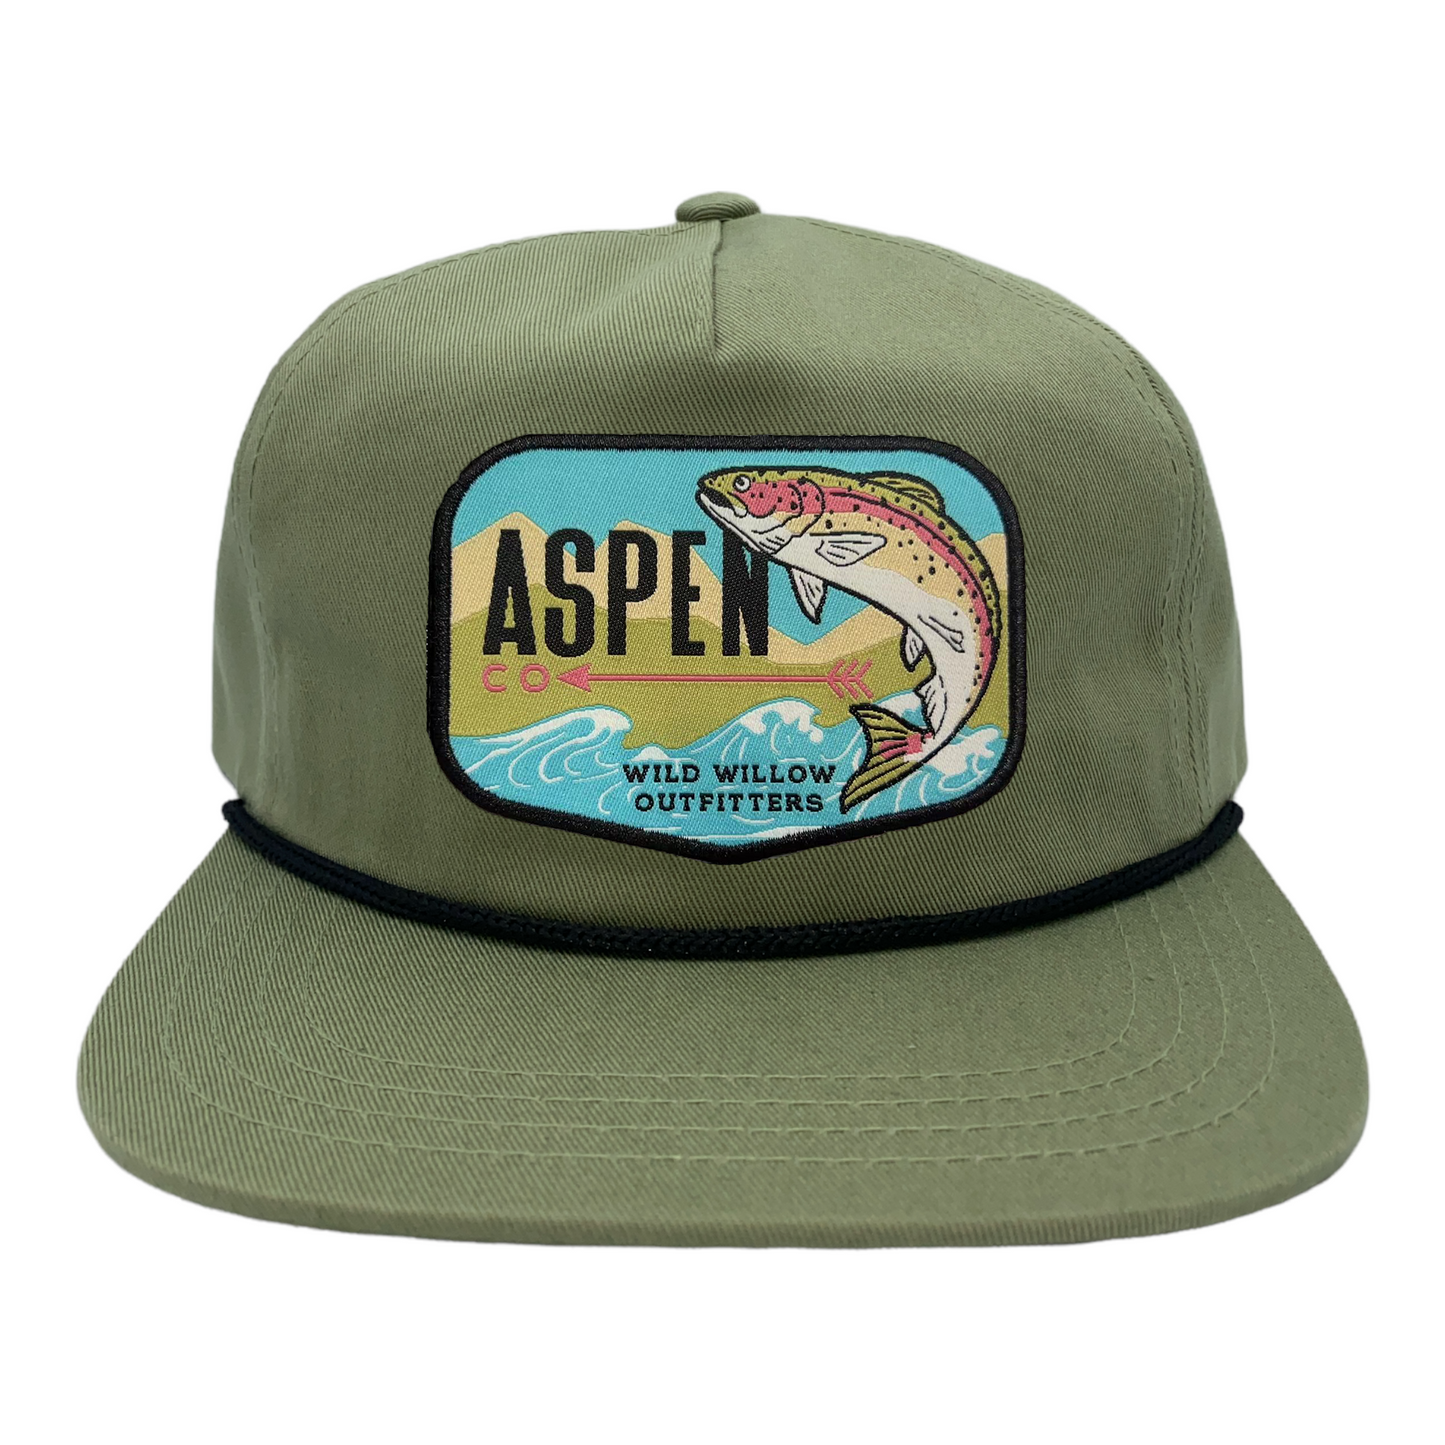 Wild Willow Outfitters Fishing - Aspen, CO Snapback